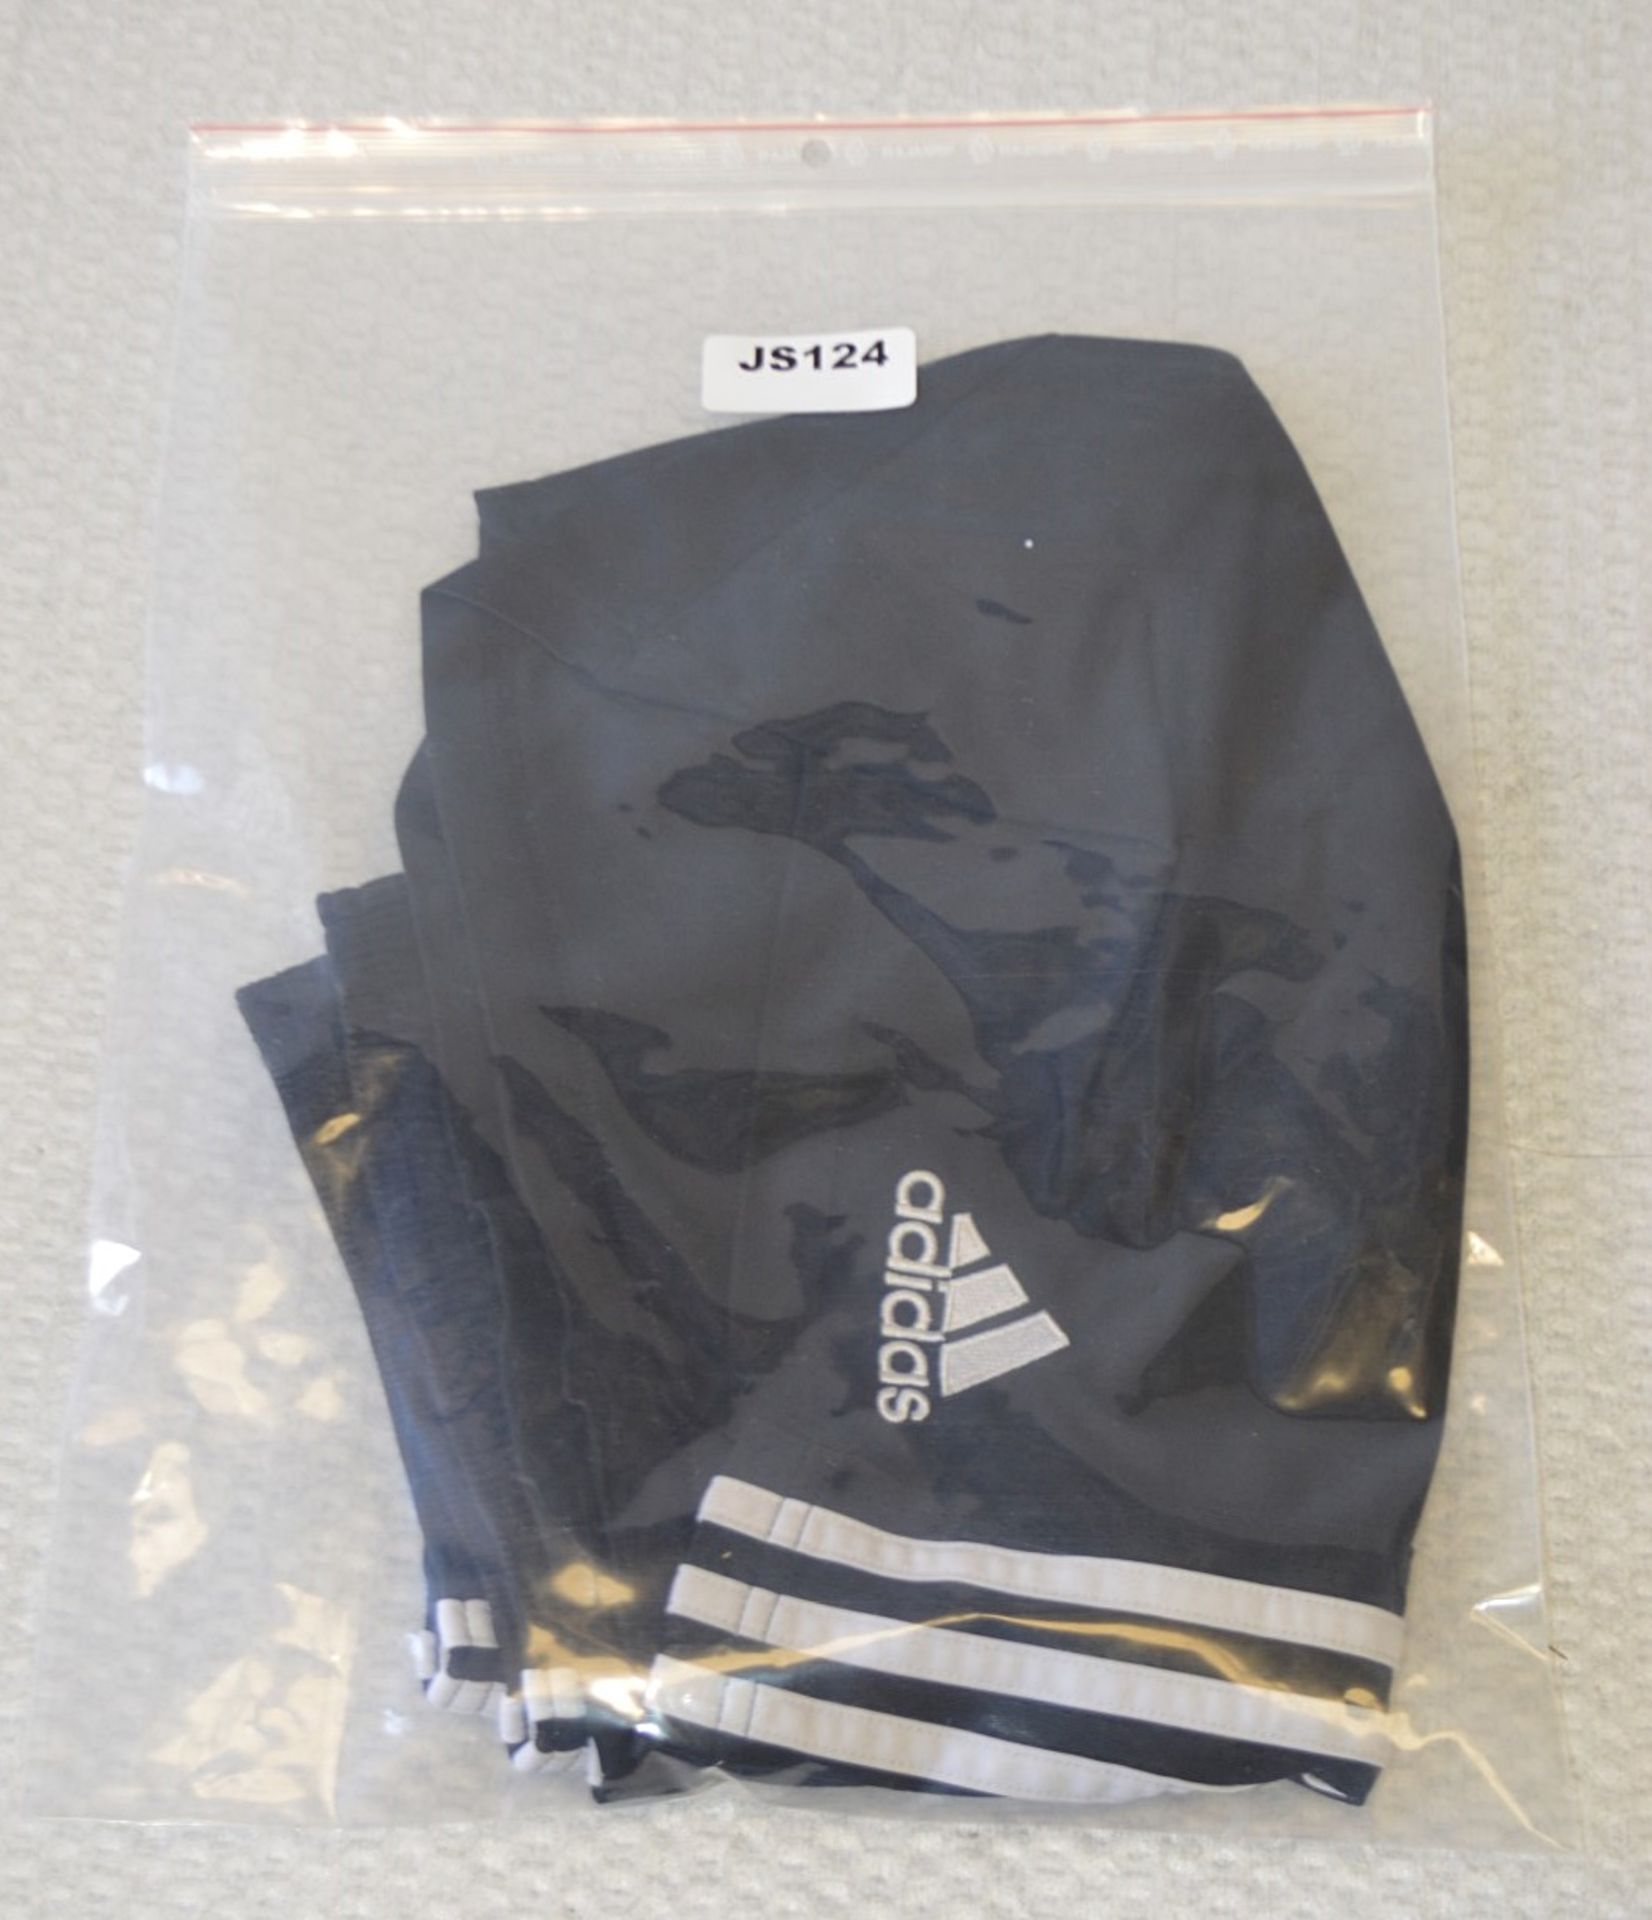 4 x Assorted Pairs Of Men's Genuine Adidas Shorts - AllIn Black - Sizes: L-XL - Preowned - Image 22 of 23